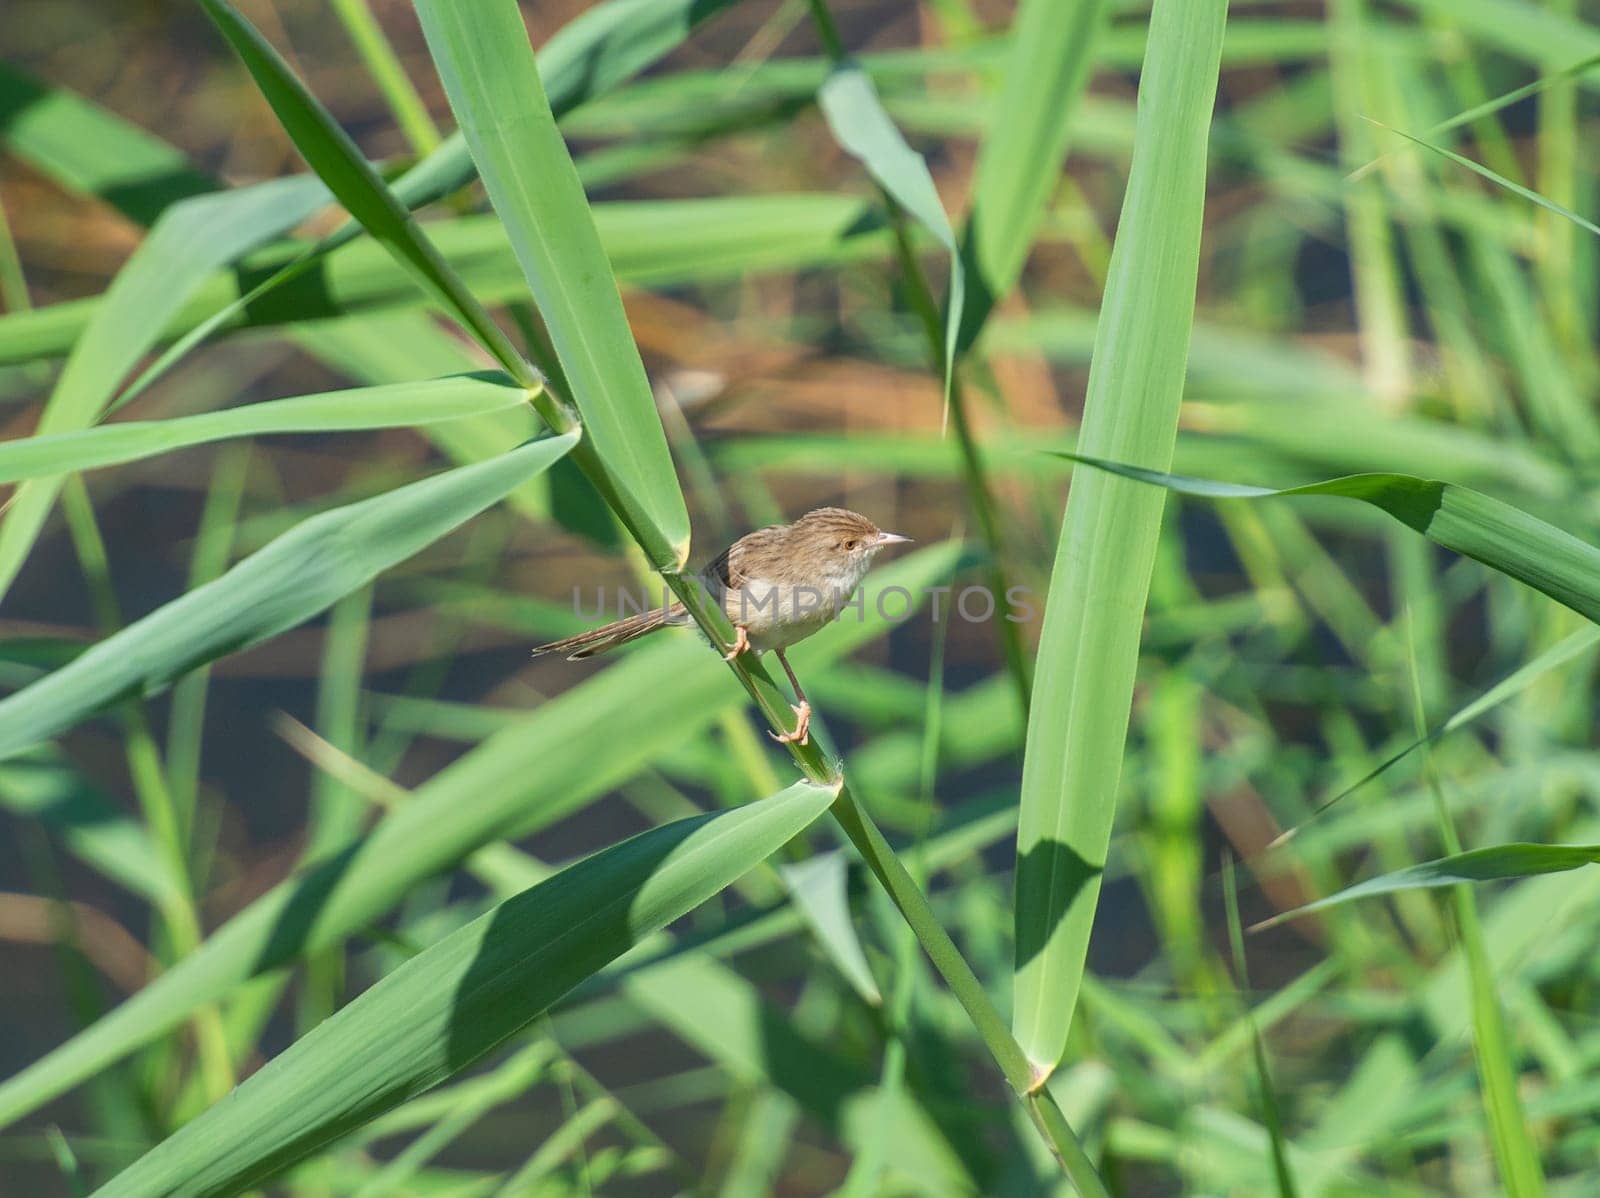 Eurasian common reed warbler perched on grass reeds by river bank by paulvinten